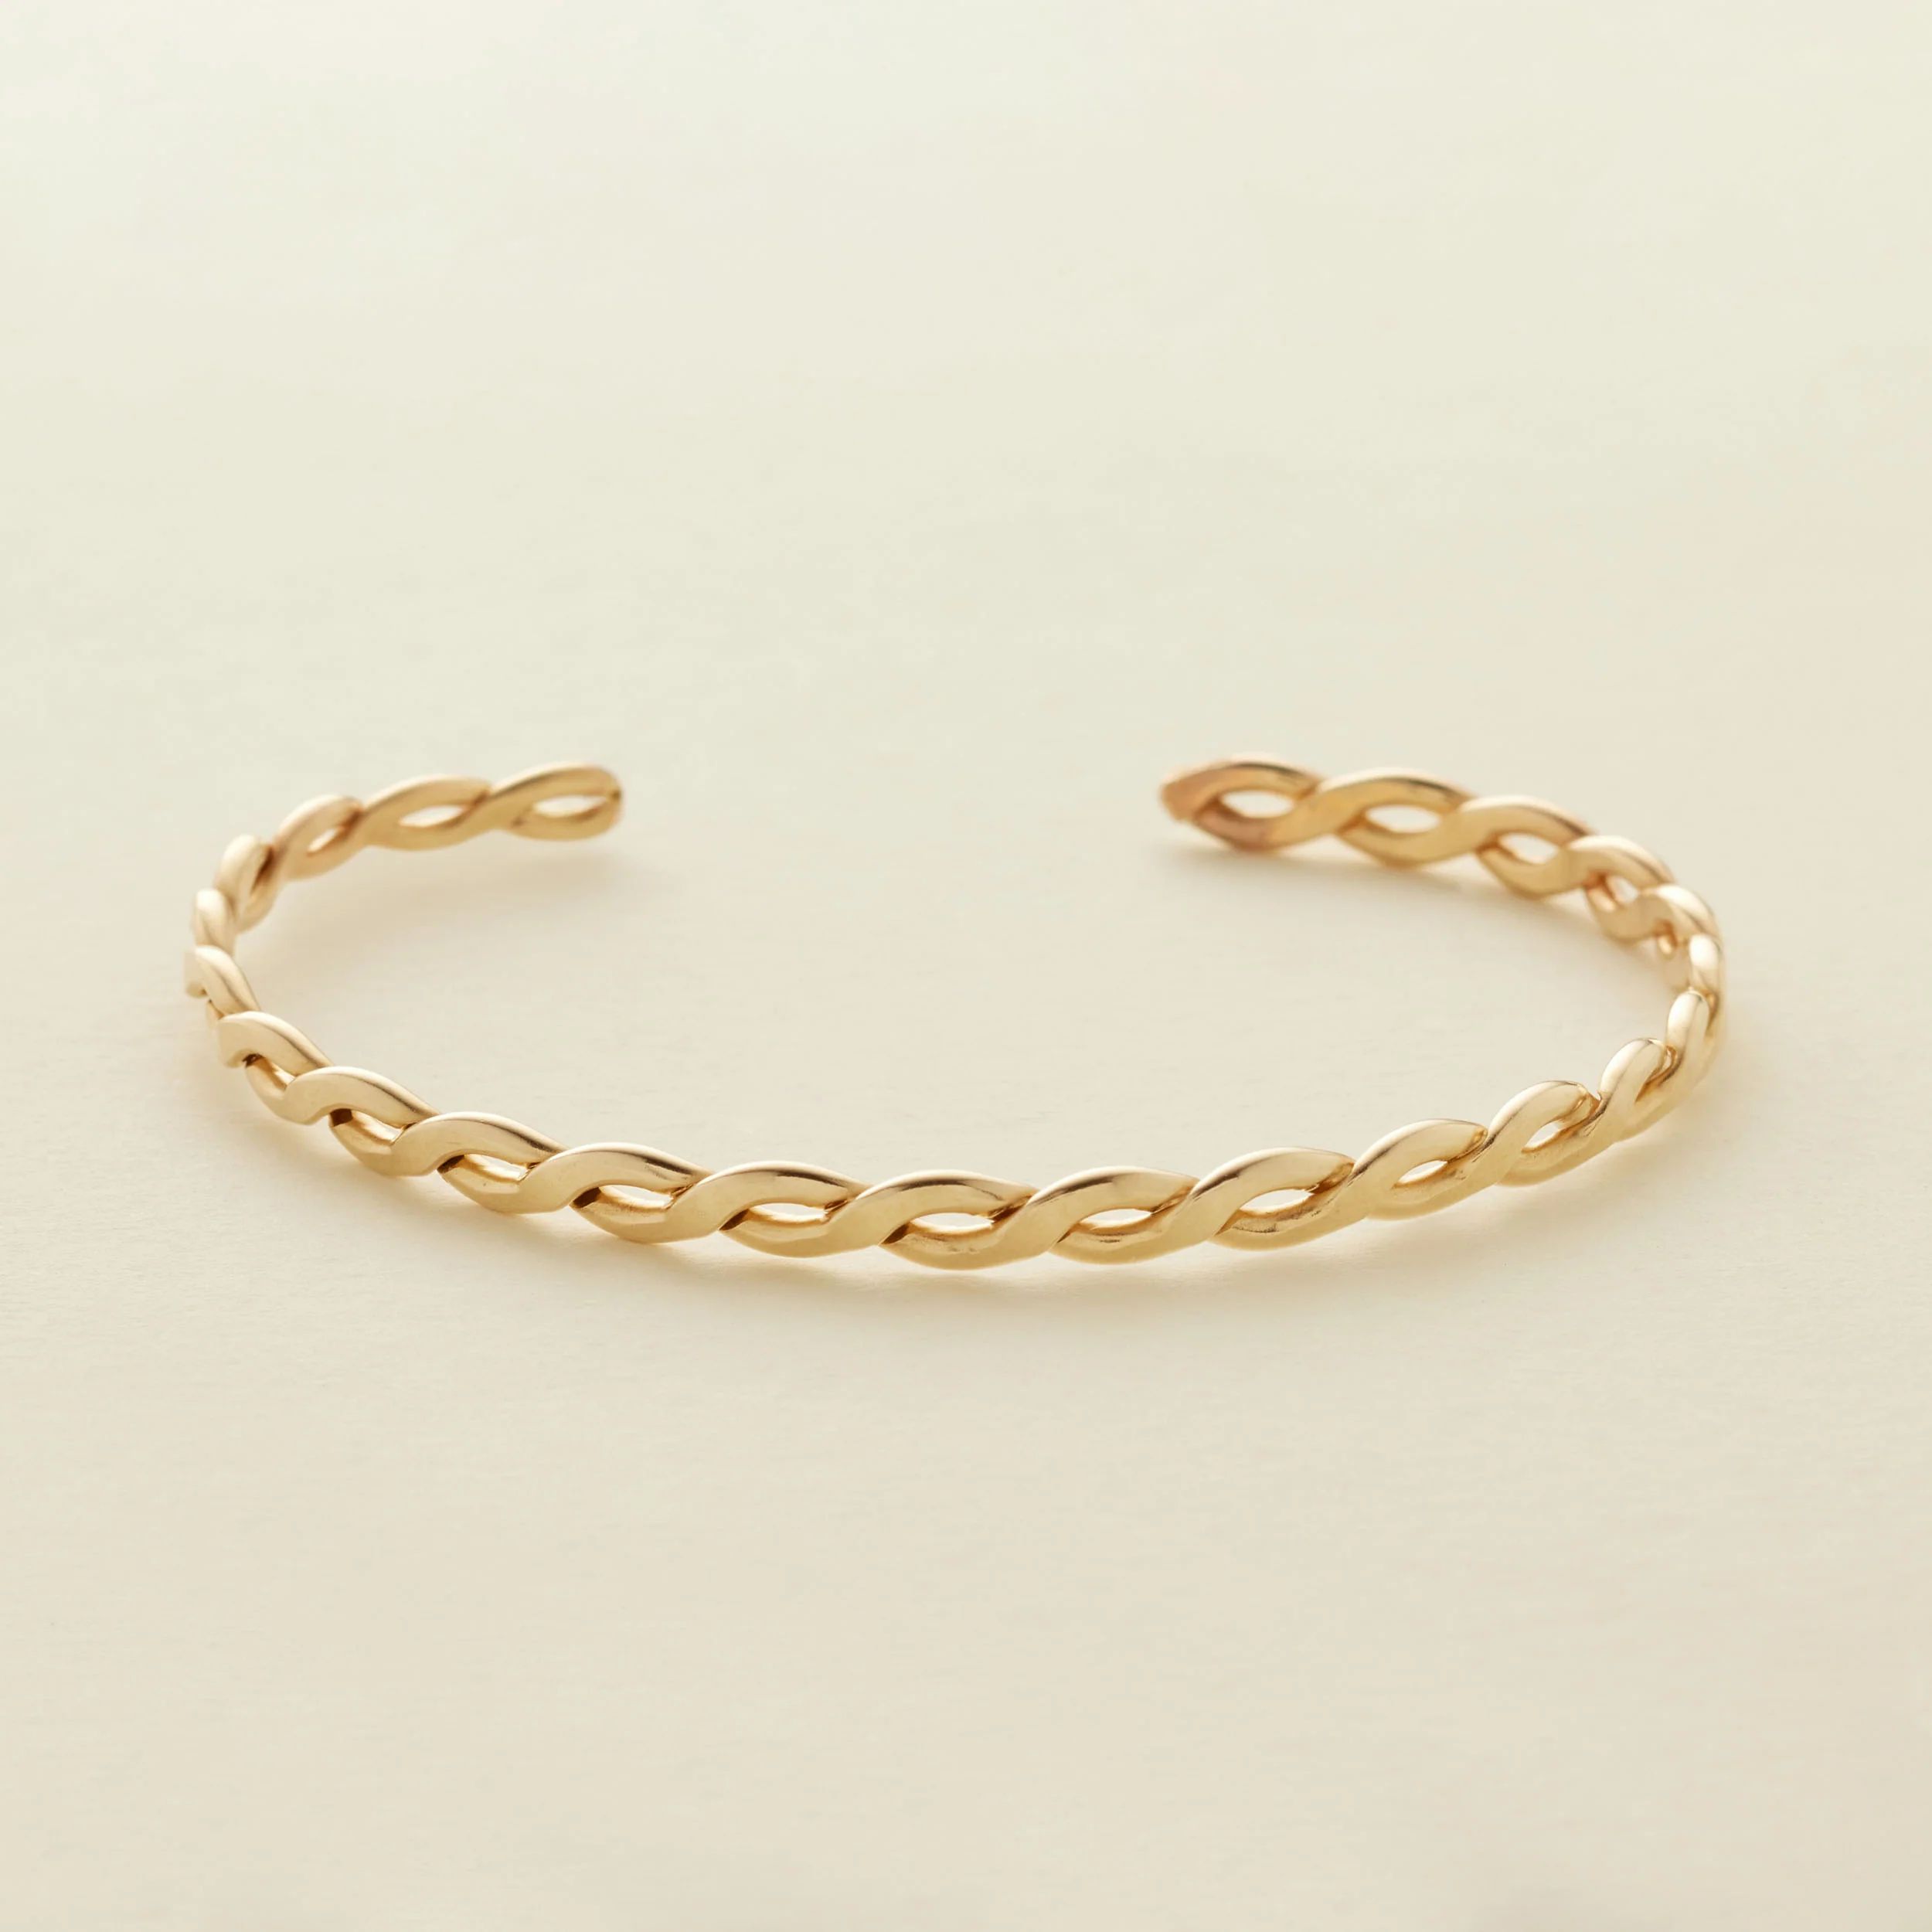 Laurel Cuff Bracelet | Made by Mary (US)